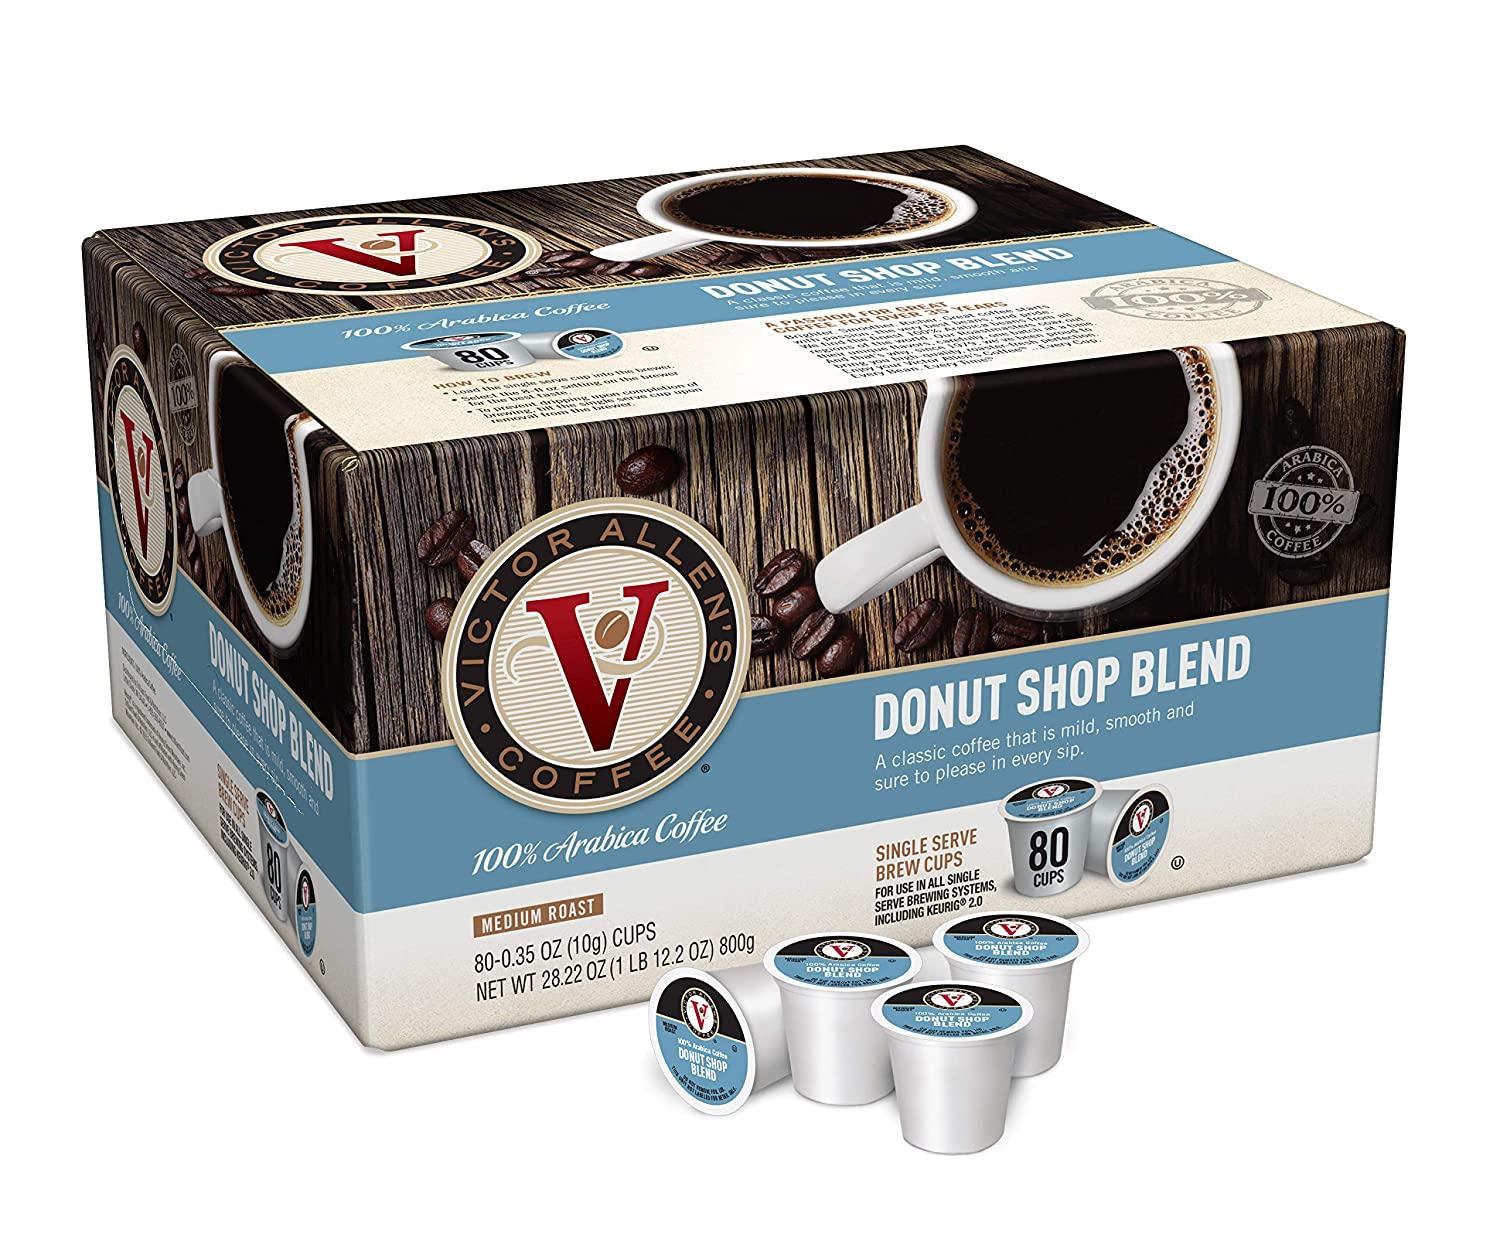 80 Victor Allen Coffee Medium Roast K-Cups for $15.30 Shipped